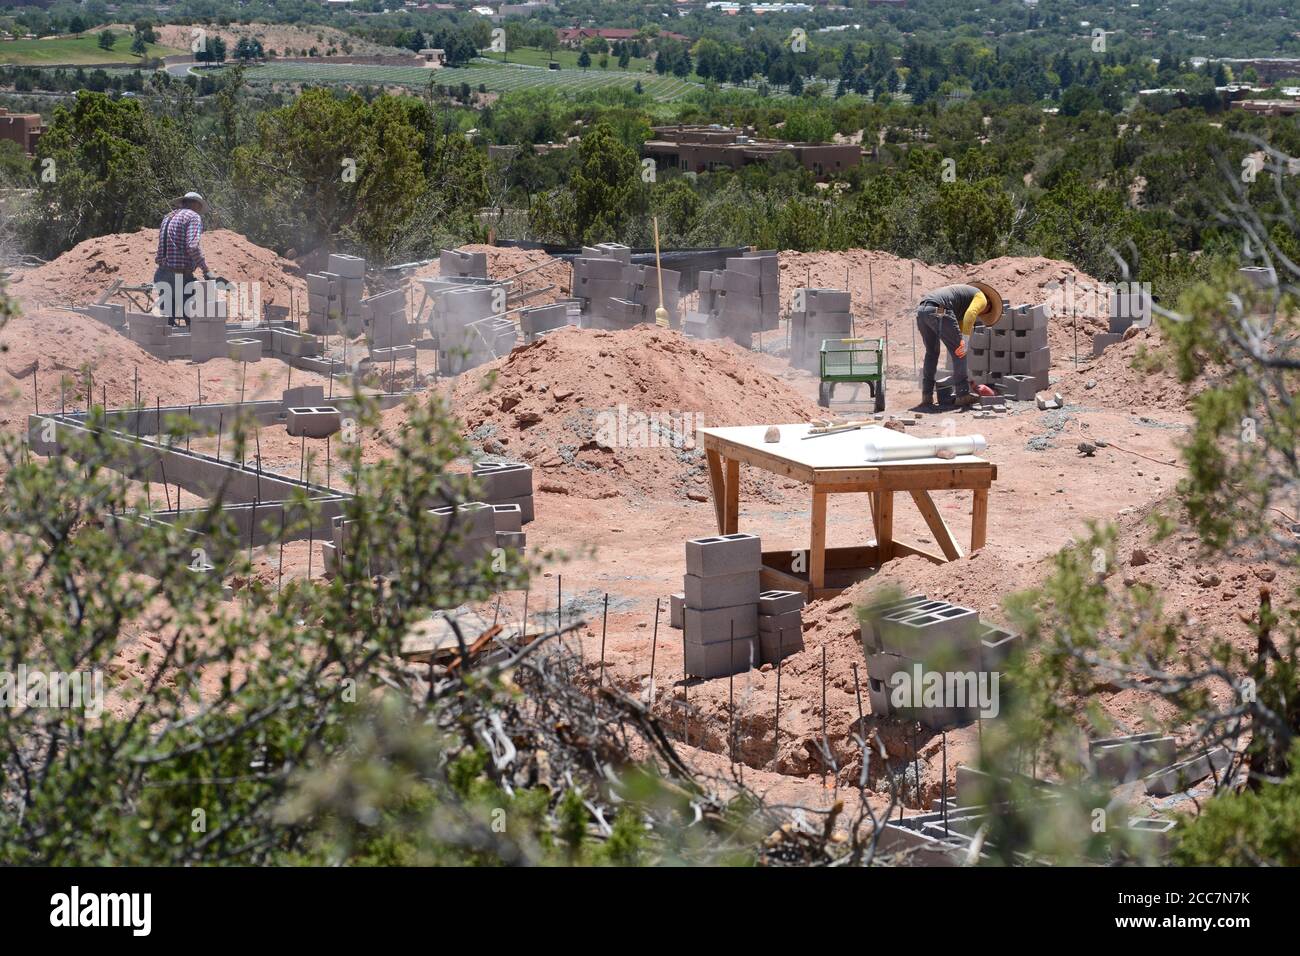 Construction workers lay a cinder block foundation for a new home being built overlooking Santa Fe, New Mexico USA. Stock Photo